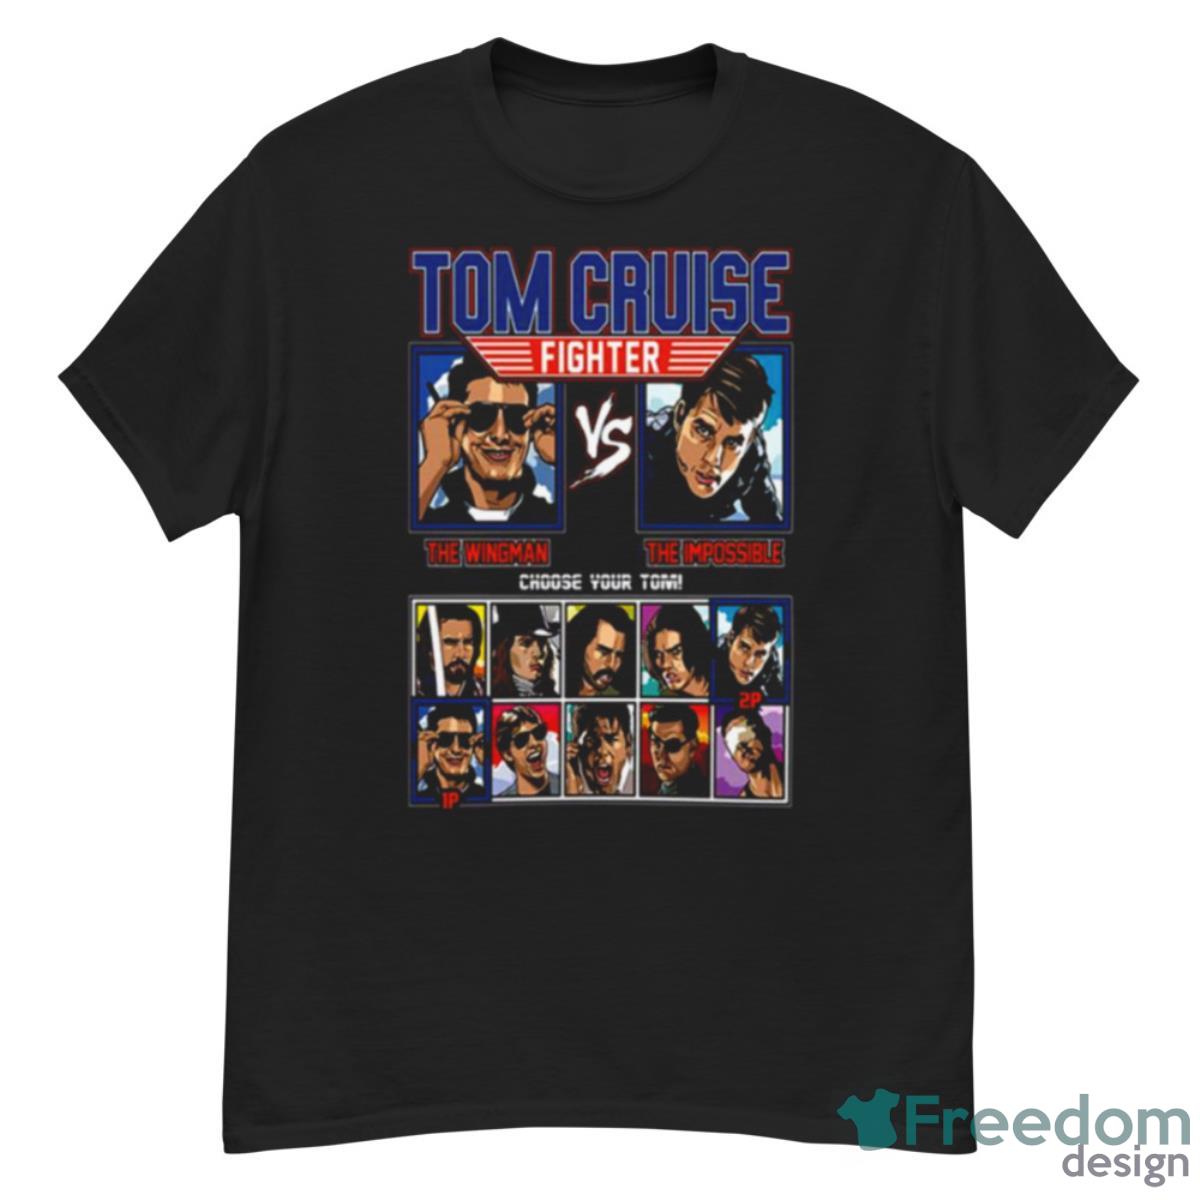 Tom Cruise Fighter Topgun Vs Mission Impossible shirt - G500 Men’s Classic T-Shirt